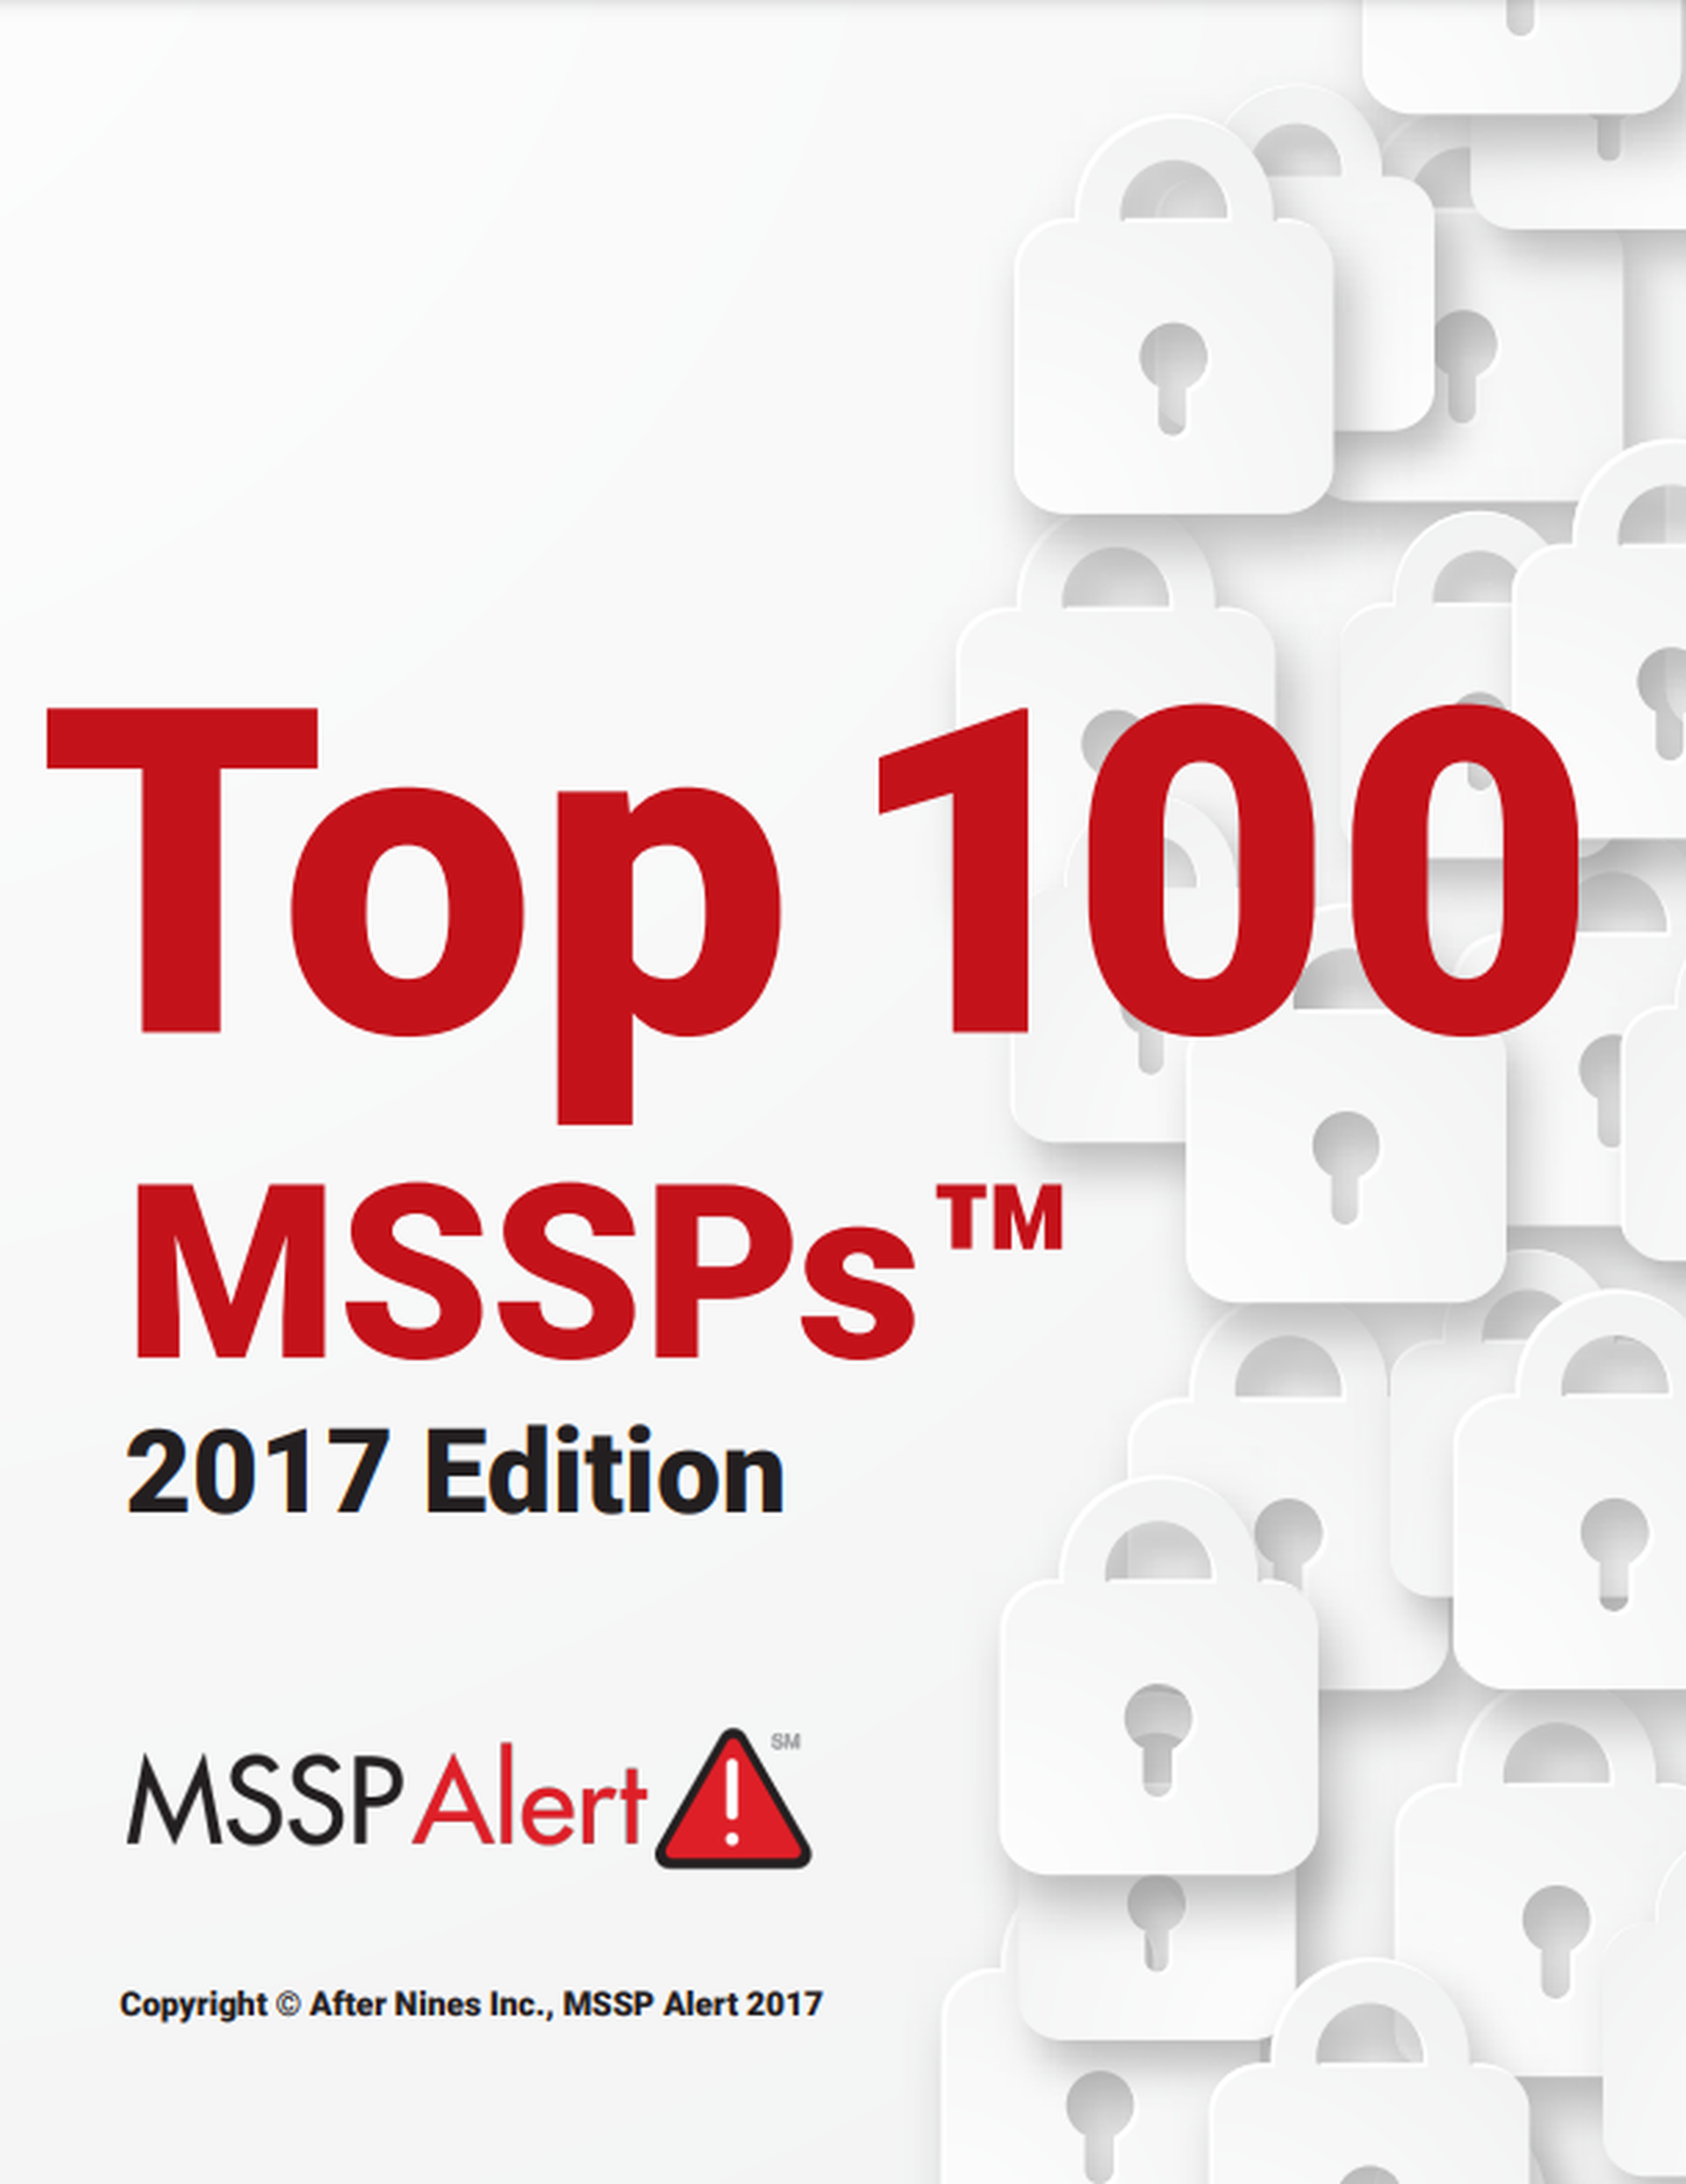 Top 100 MSSPs 2017 Edition